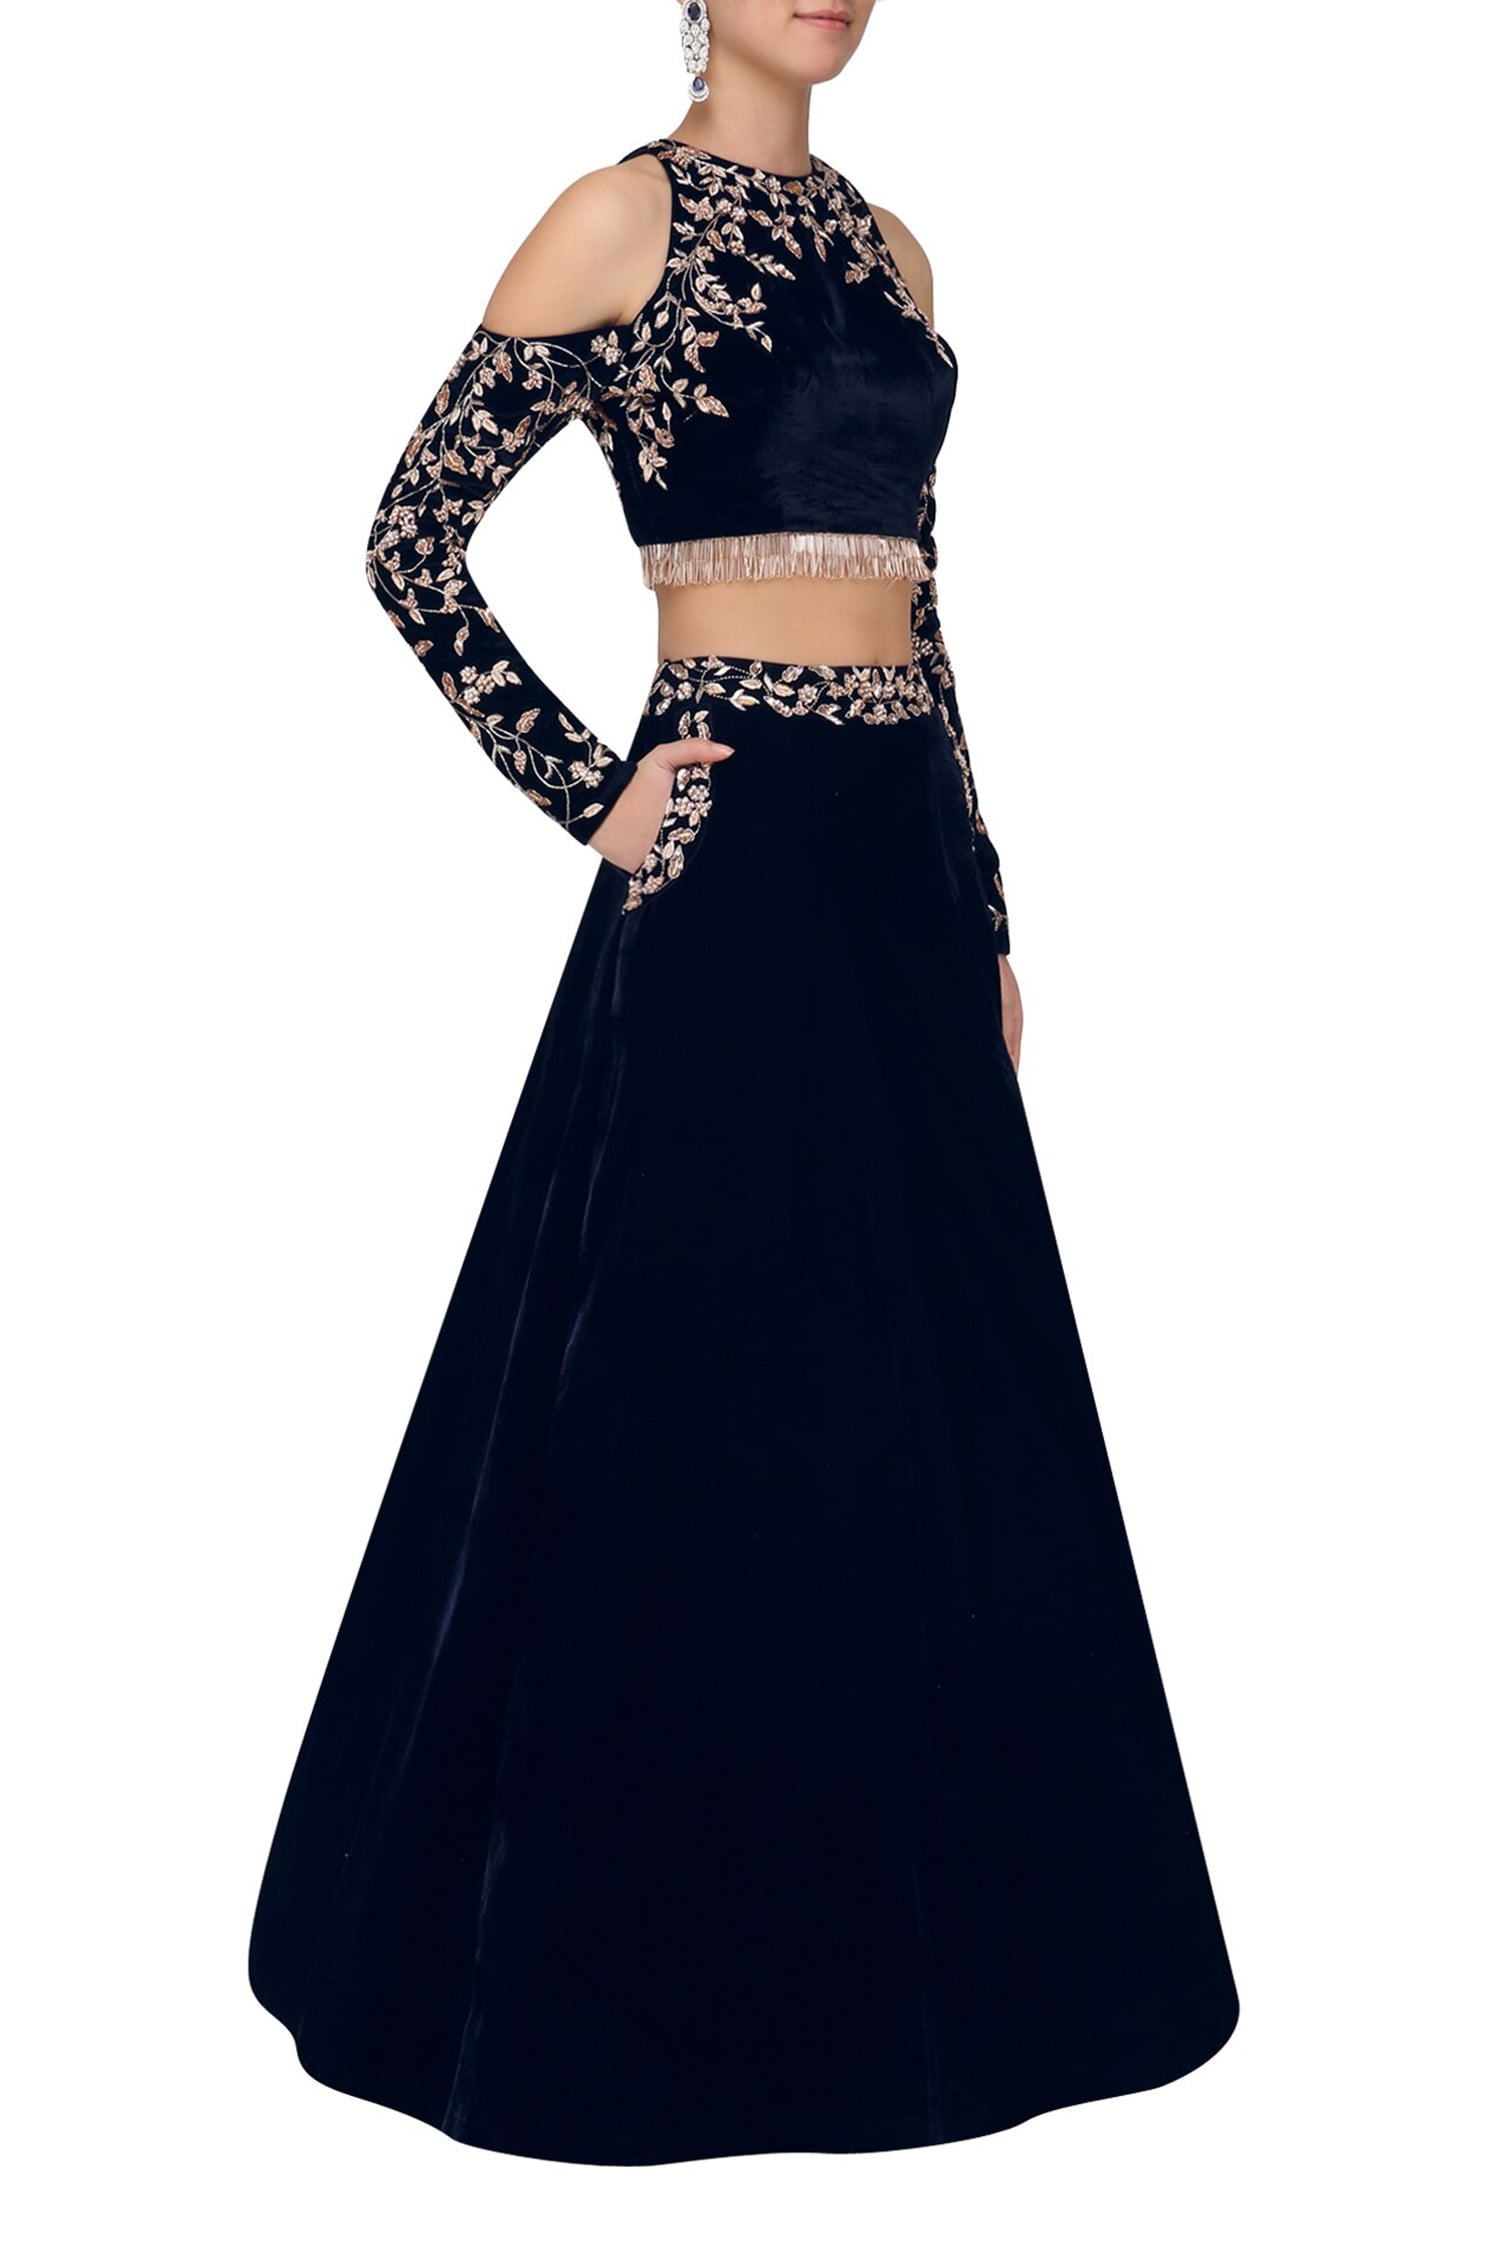 Buy Maroon lehenga choli in net with sequins and resham embroidered floral  jaal.